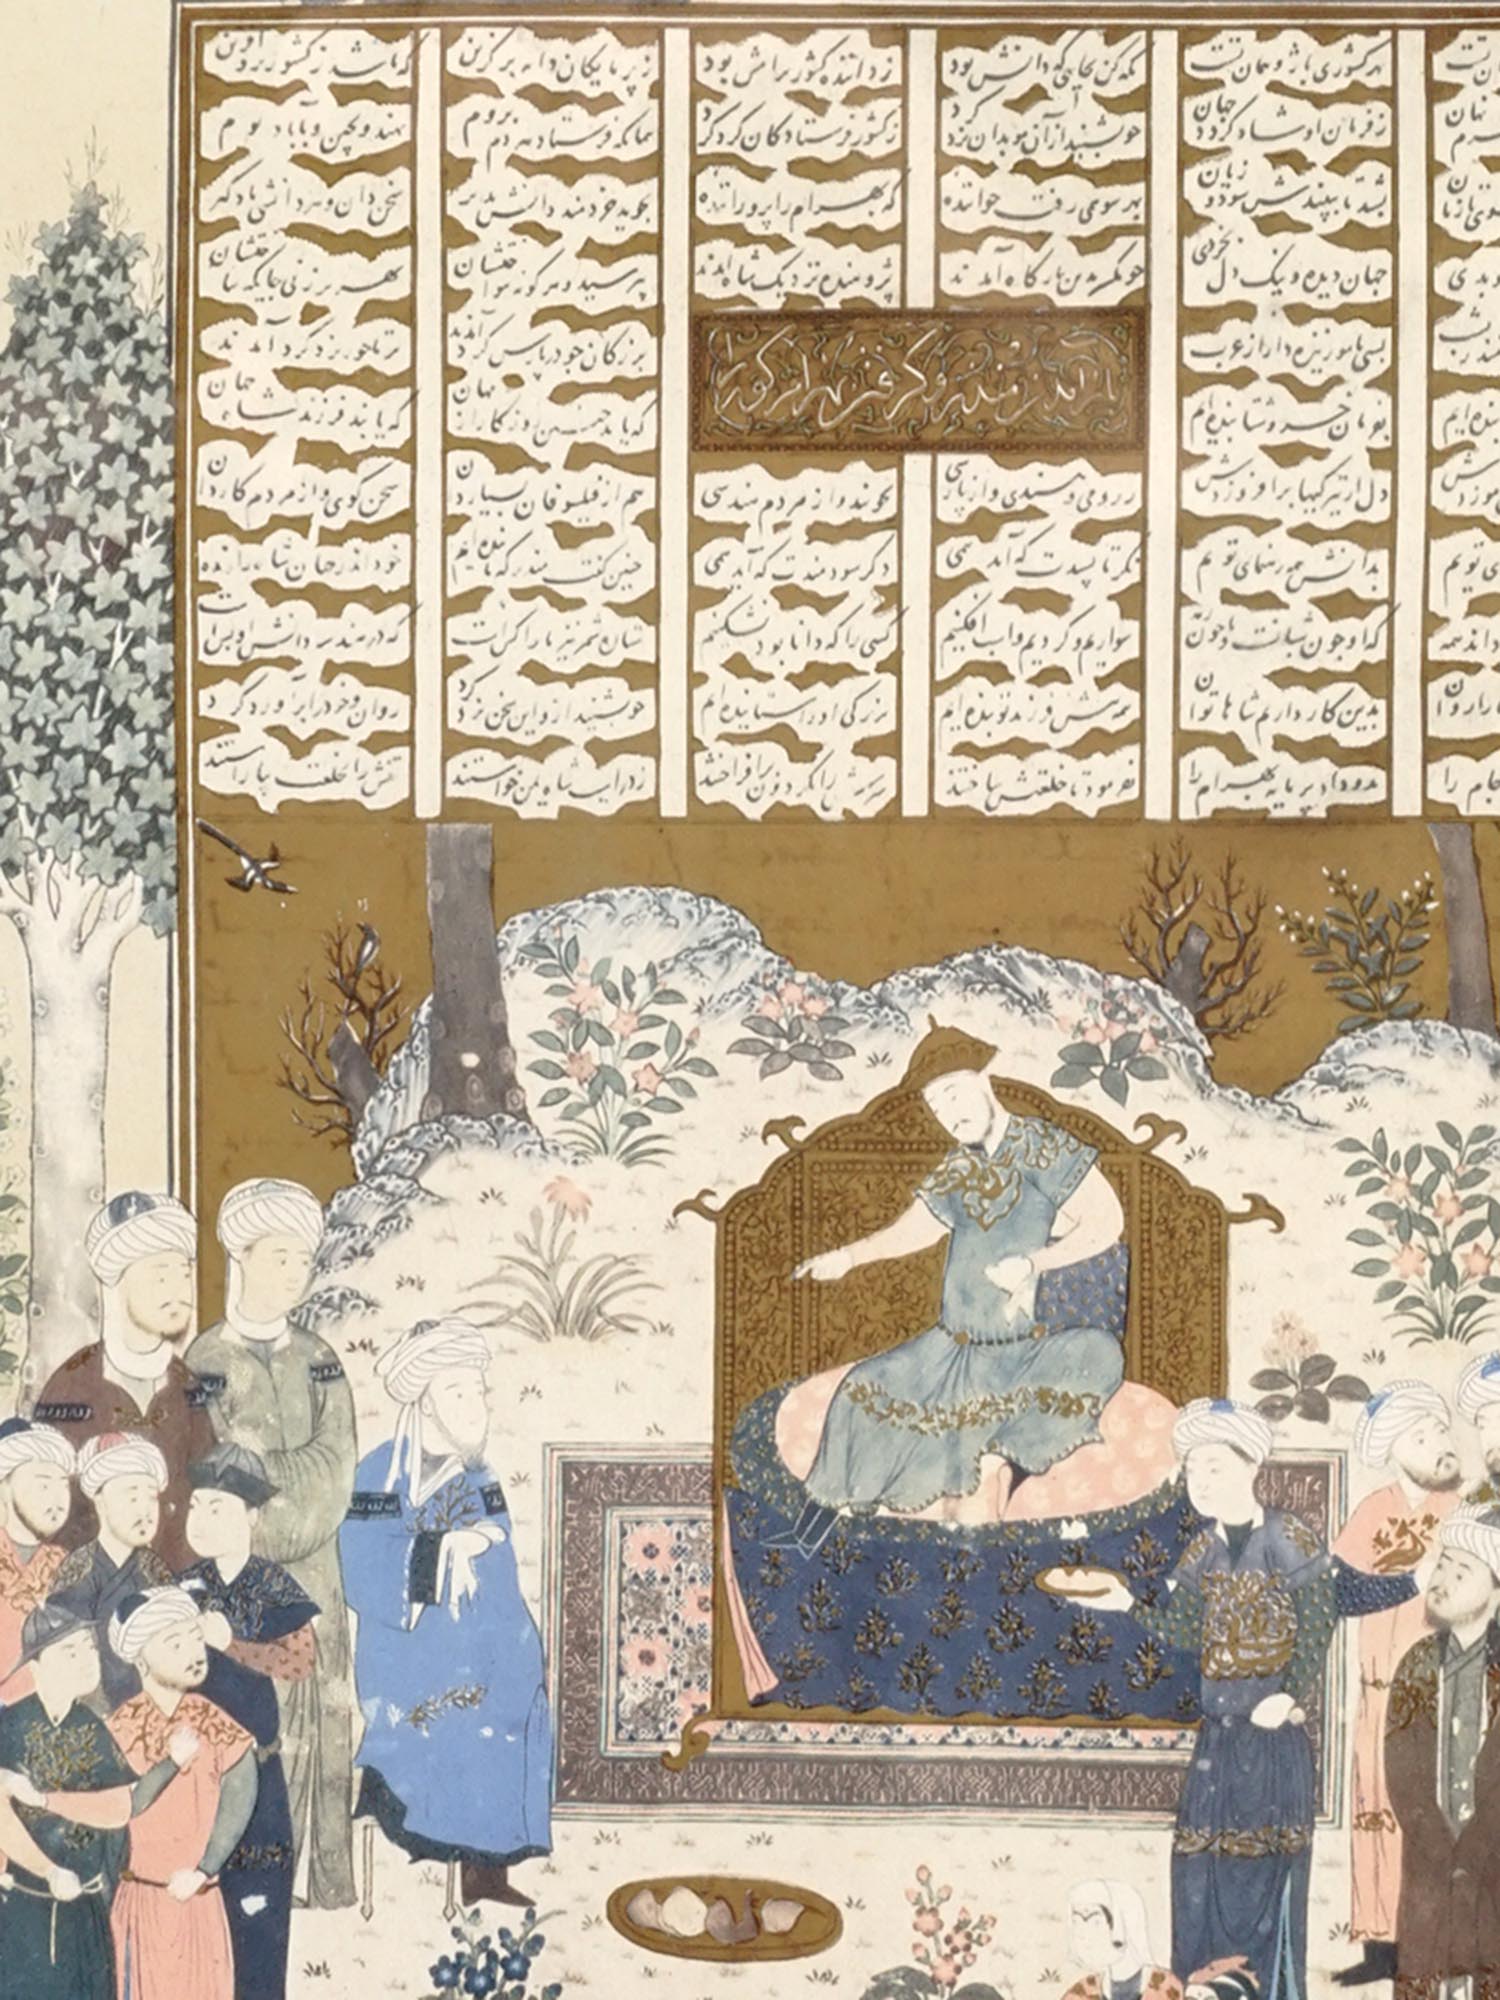 PERSIAN MINIATURE COURT SCENE FROM THE SHAHNAMEH PIC-1